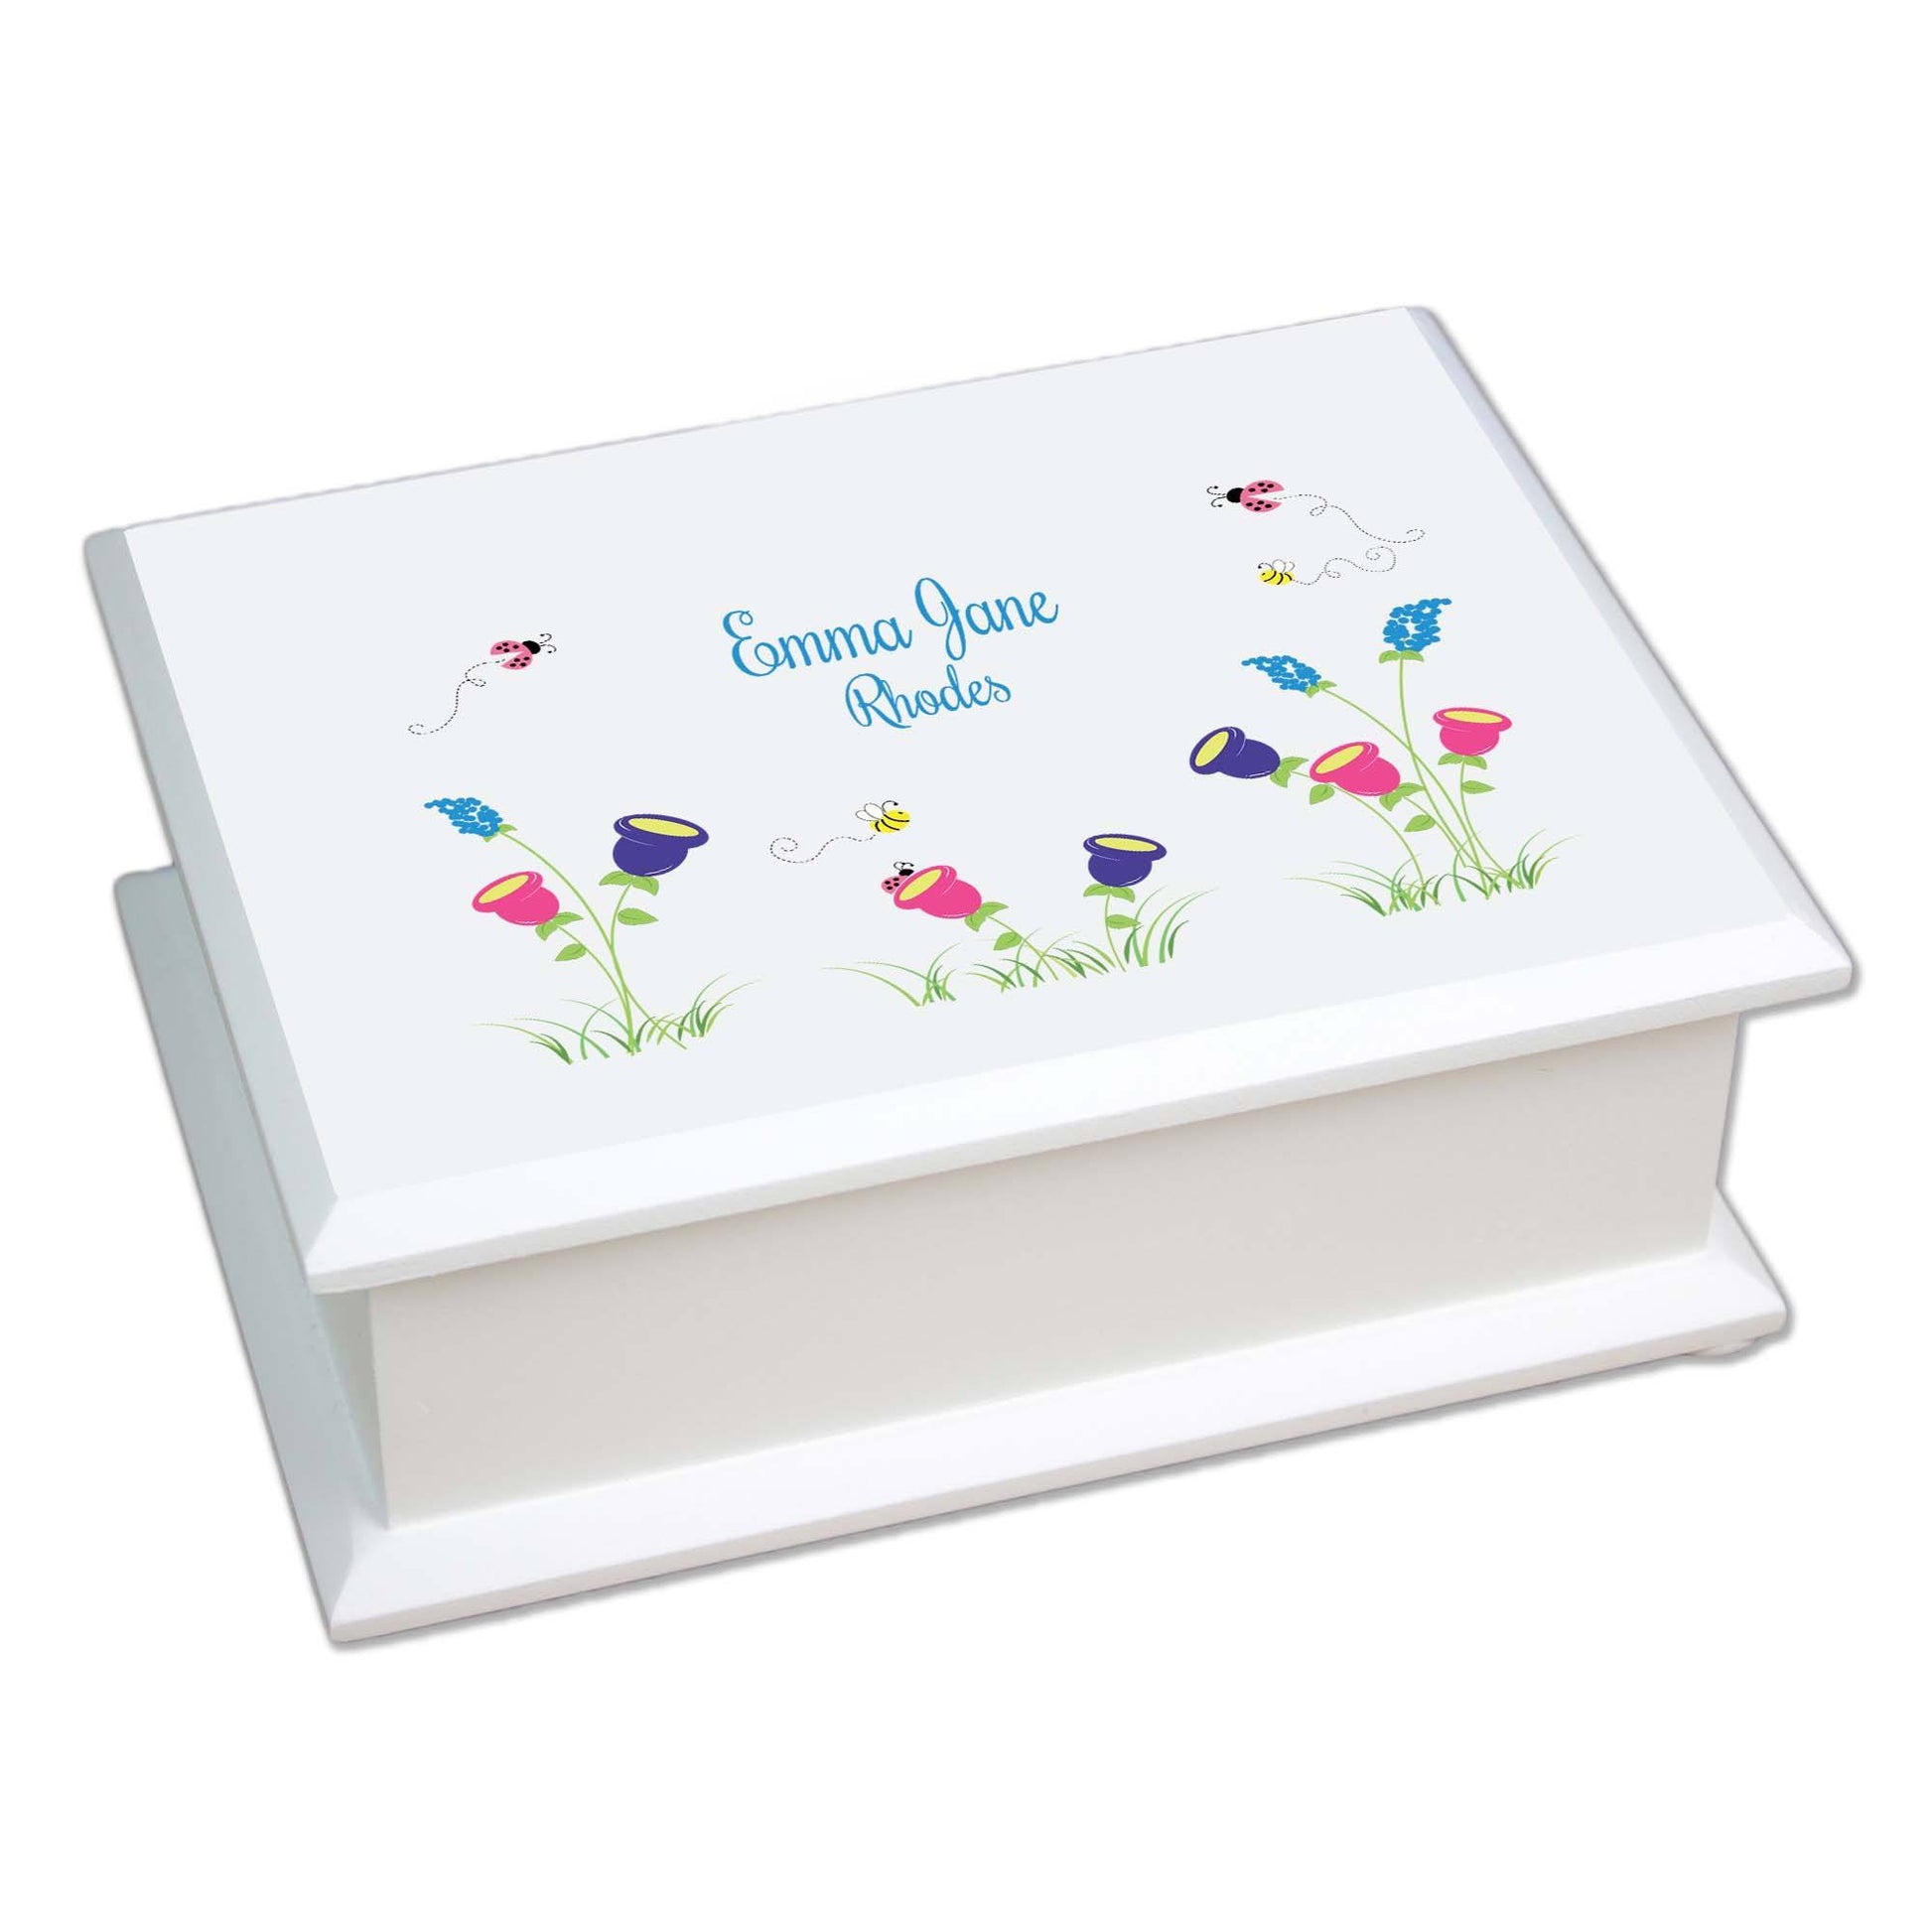 Personalized Lift Top Jewelry Box with English Garden design